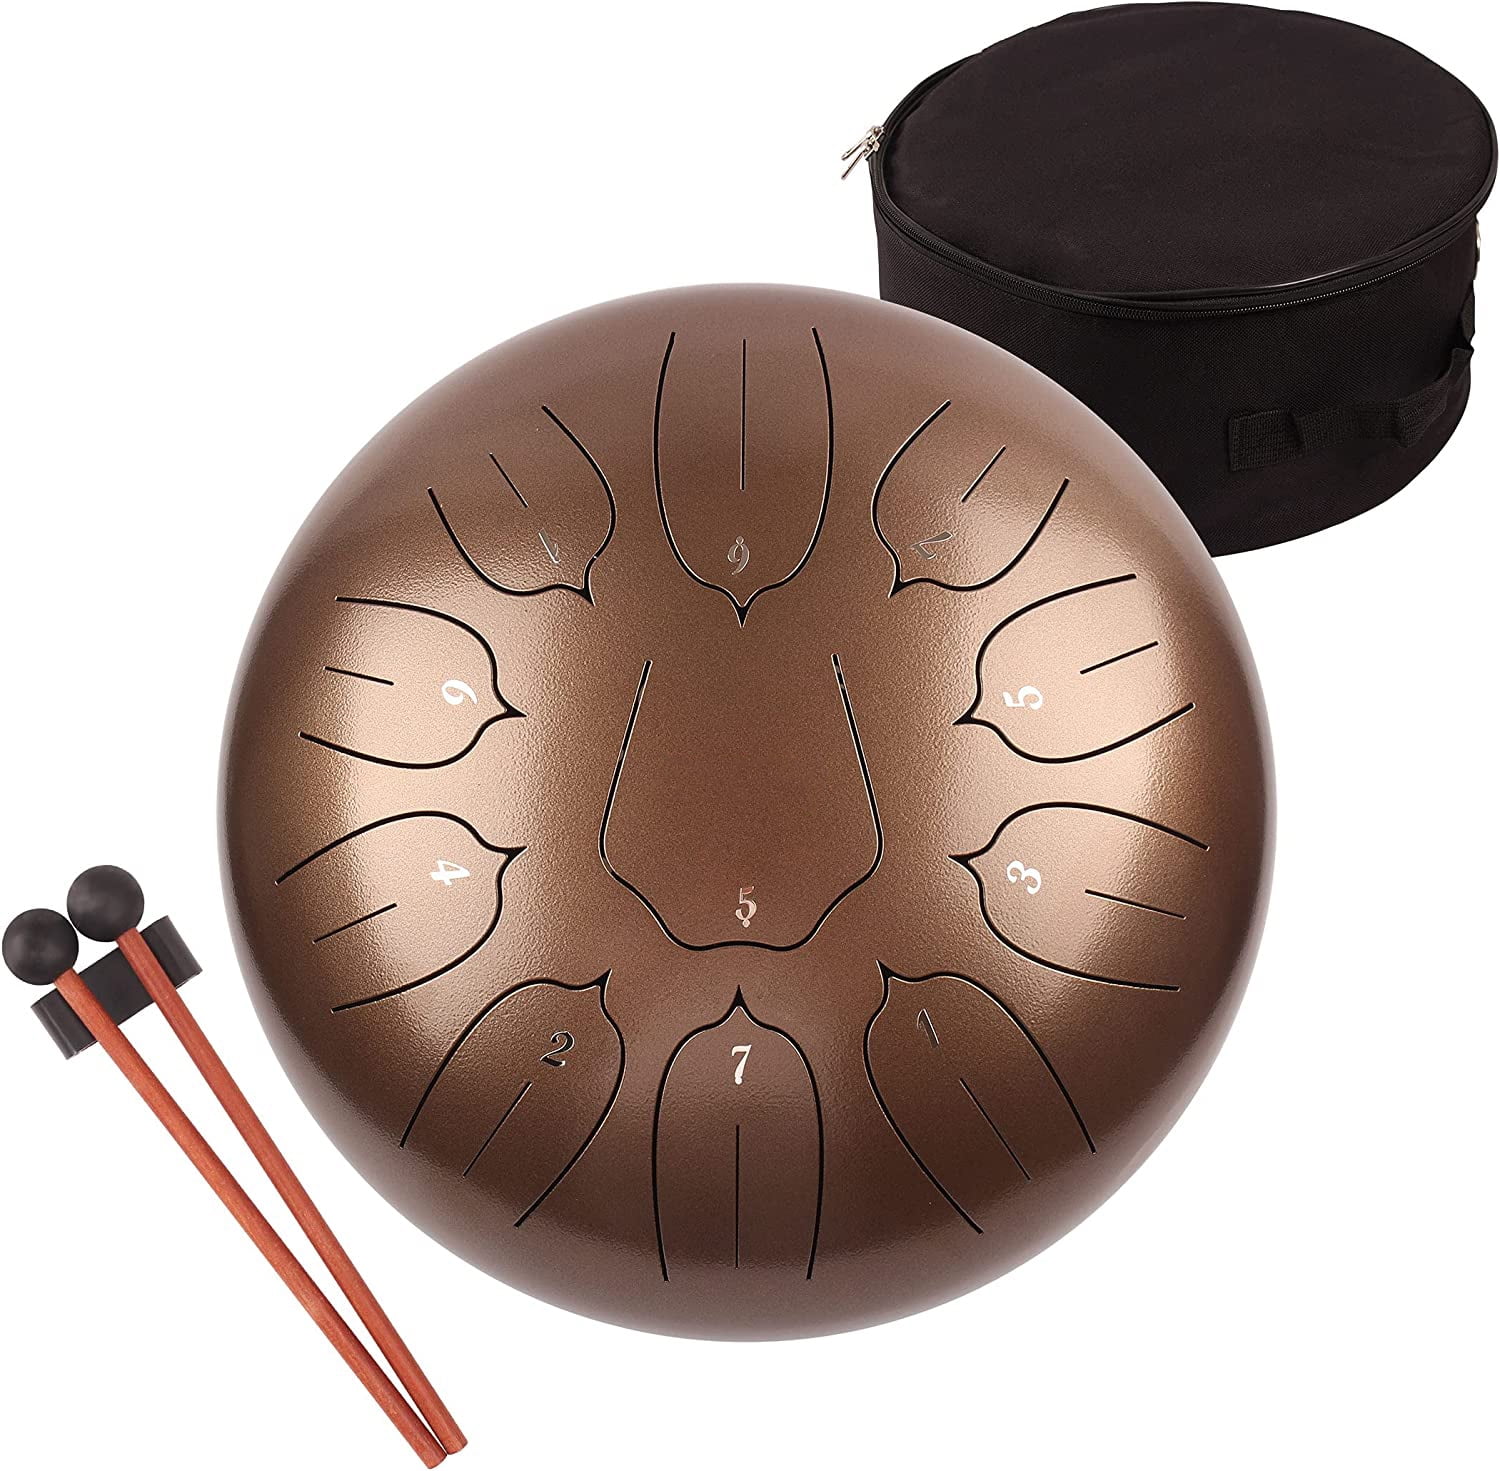 Rammerdrum Tongue Drum 15 12 Notes Banschiki-Cho, Percussions, Top